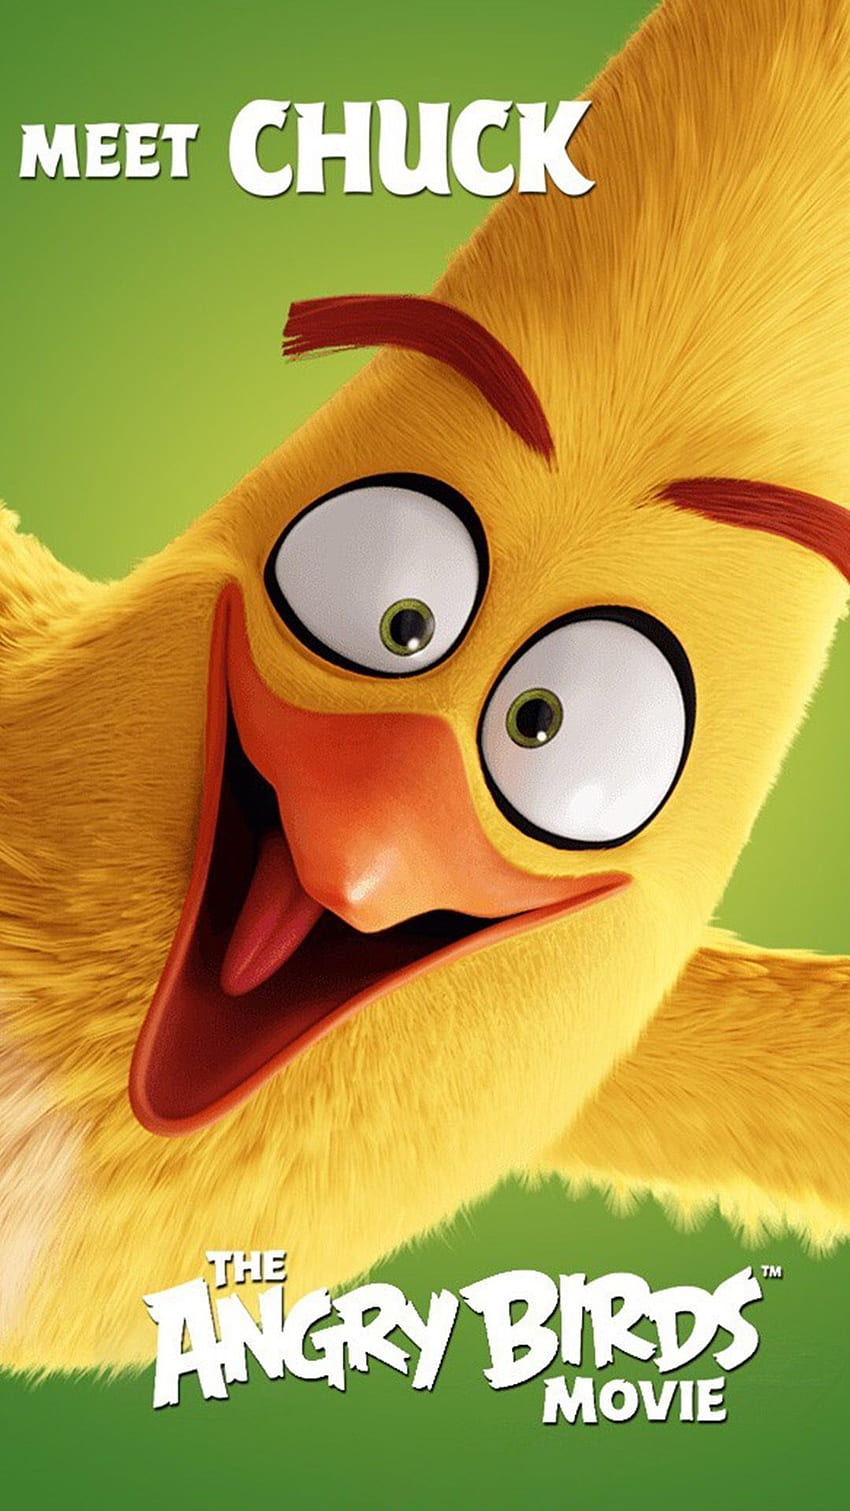 Chuck from Angry Birds. Angry birds movie, Angry birds, Angry, Angry Birds Funny HD phone wallpaper